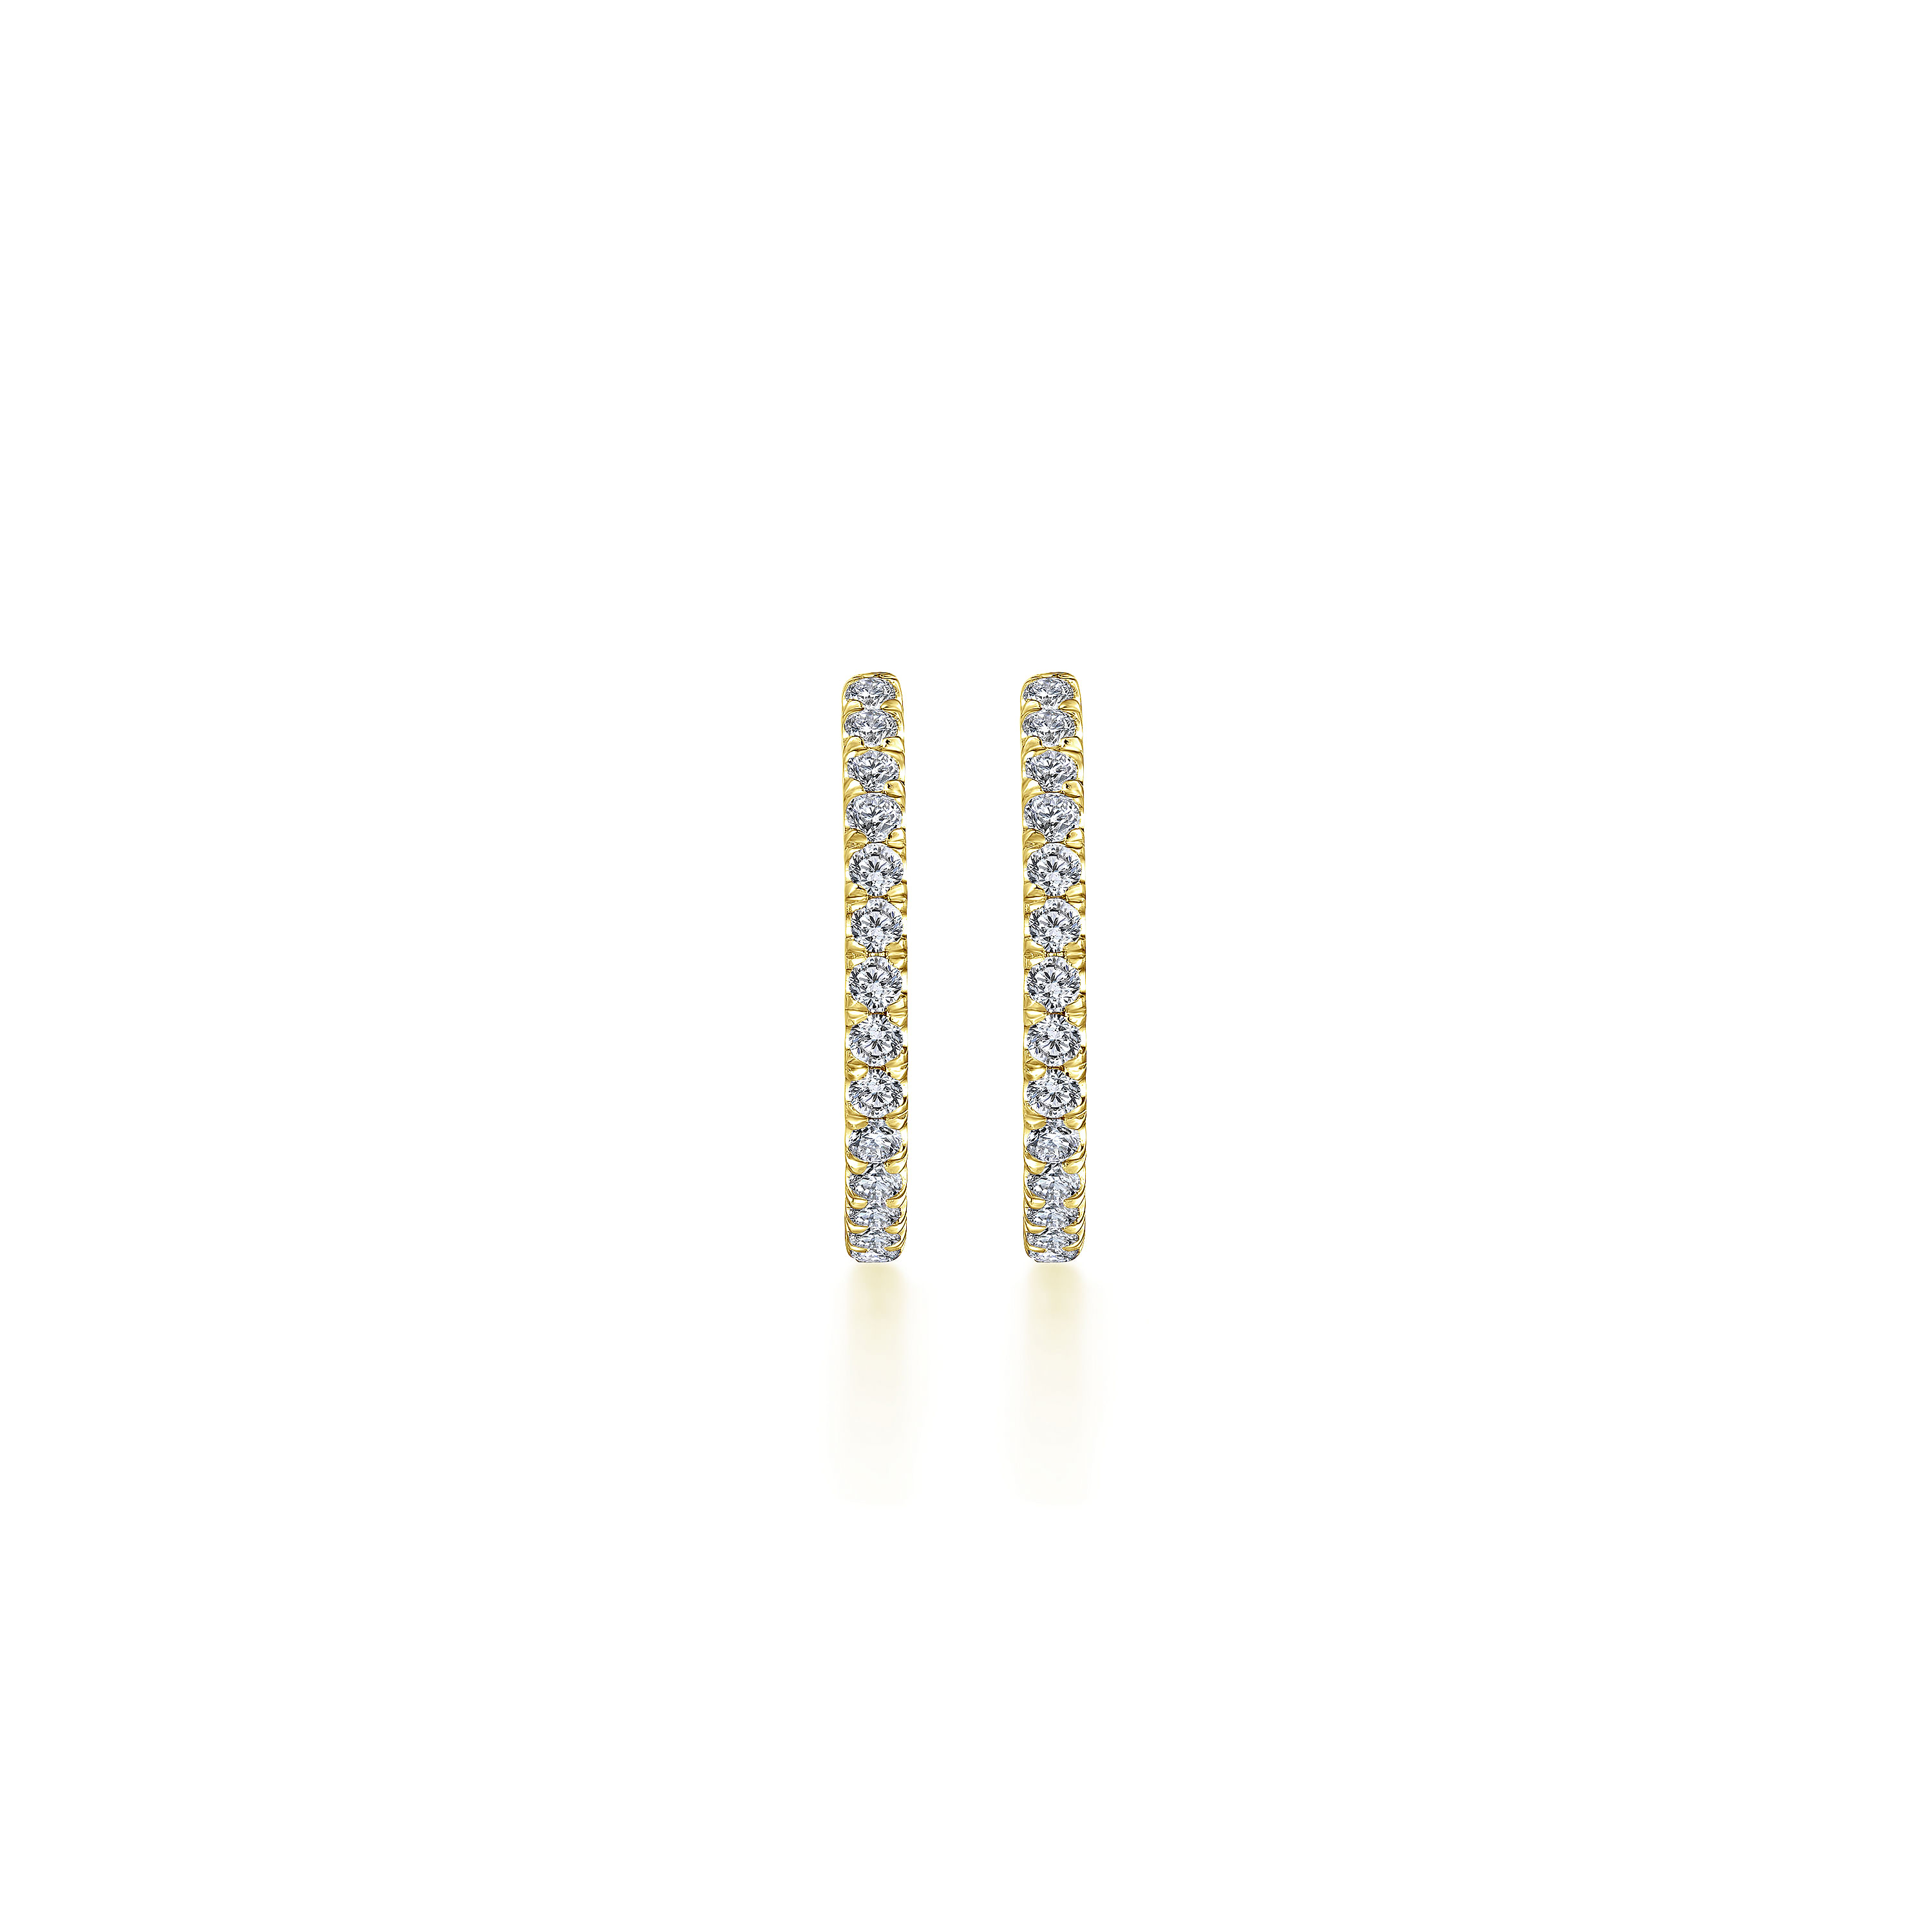 14K Yellow Gold French Pavé 20mm Round Inside Out Diamond Hoop Earrings